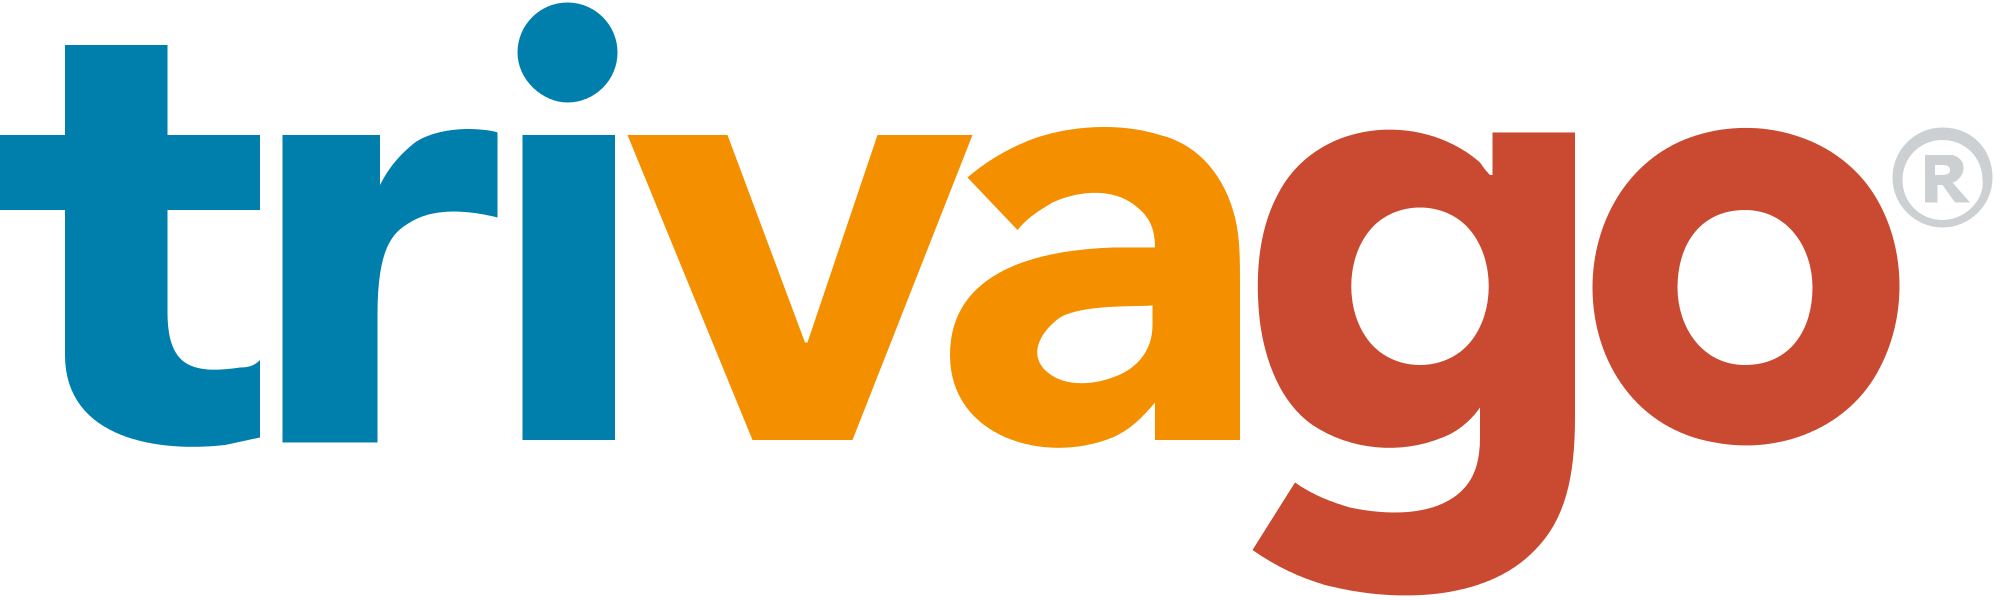 Trivago PNG - 111690